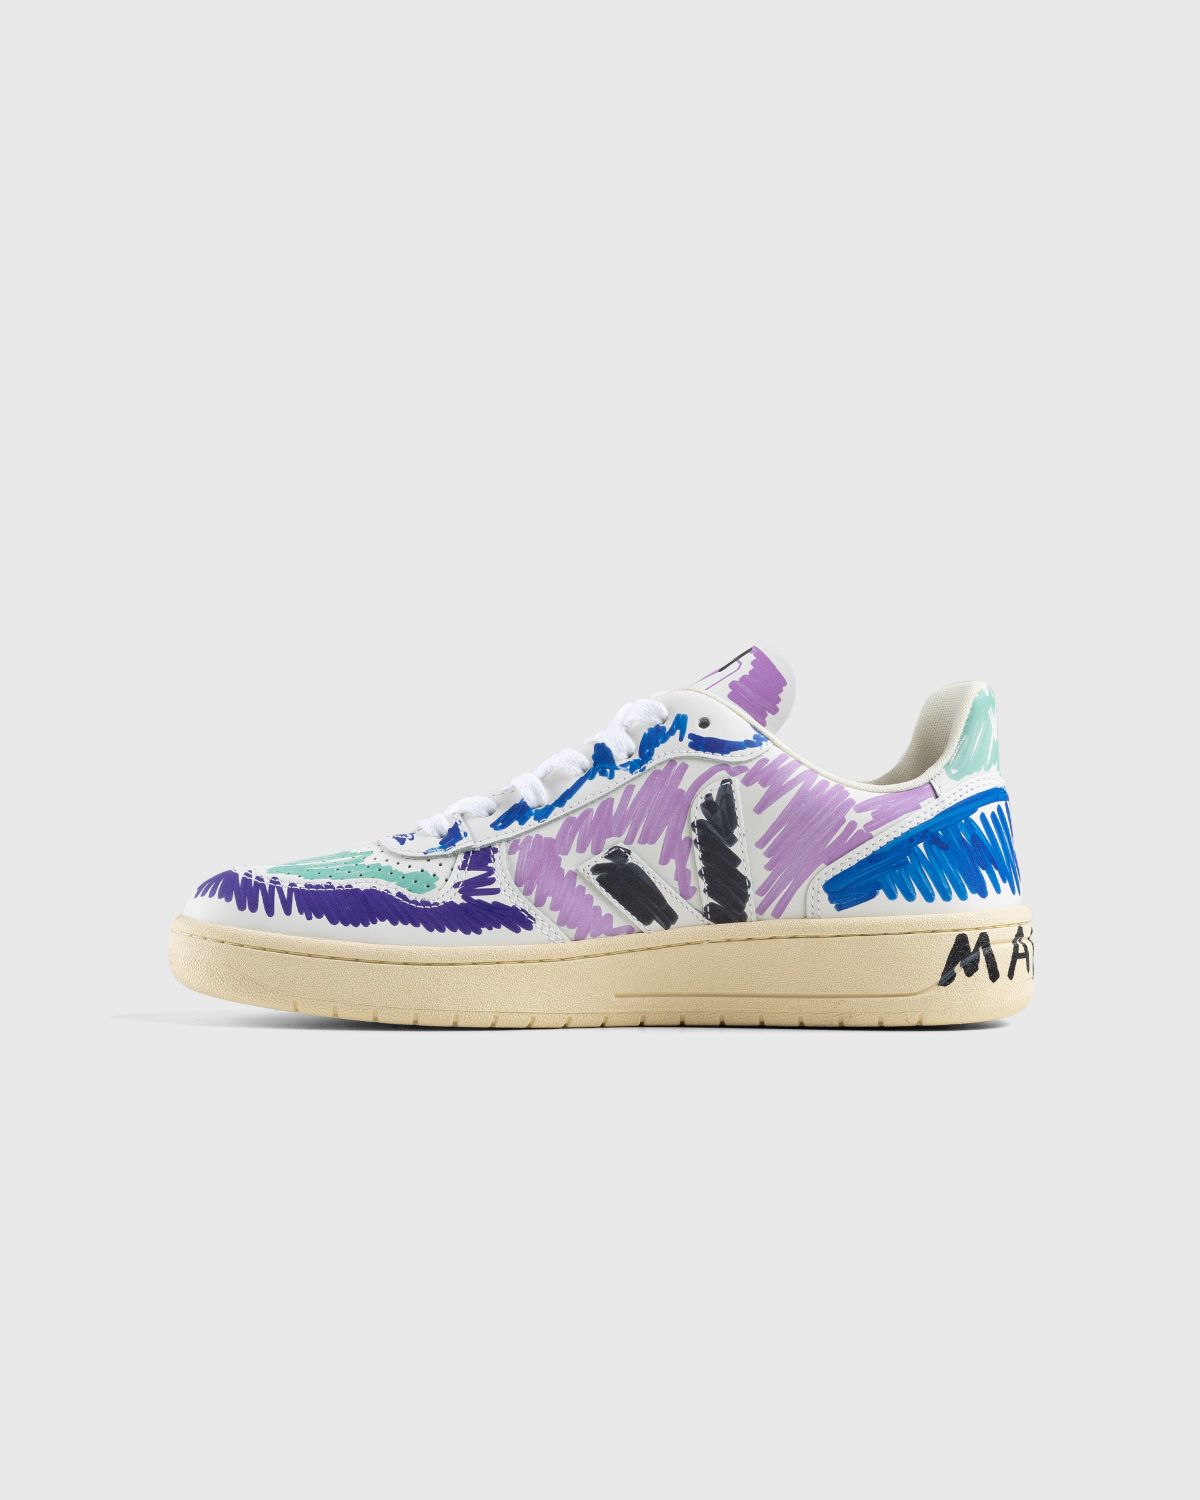 VEJA x Marni – V-10 Leather Orchid Black - Low Top Sneakers - Multi - Image 3